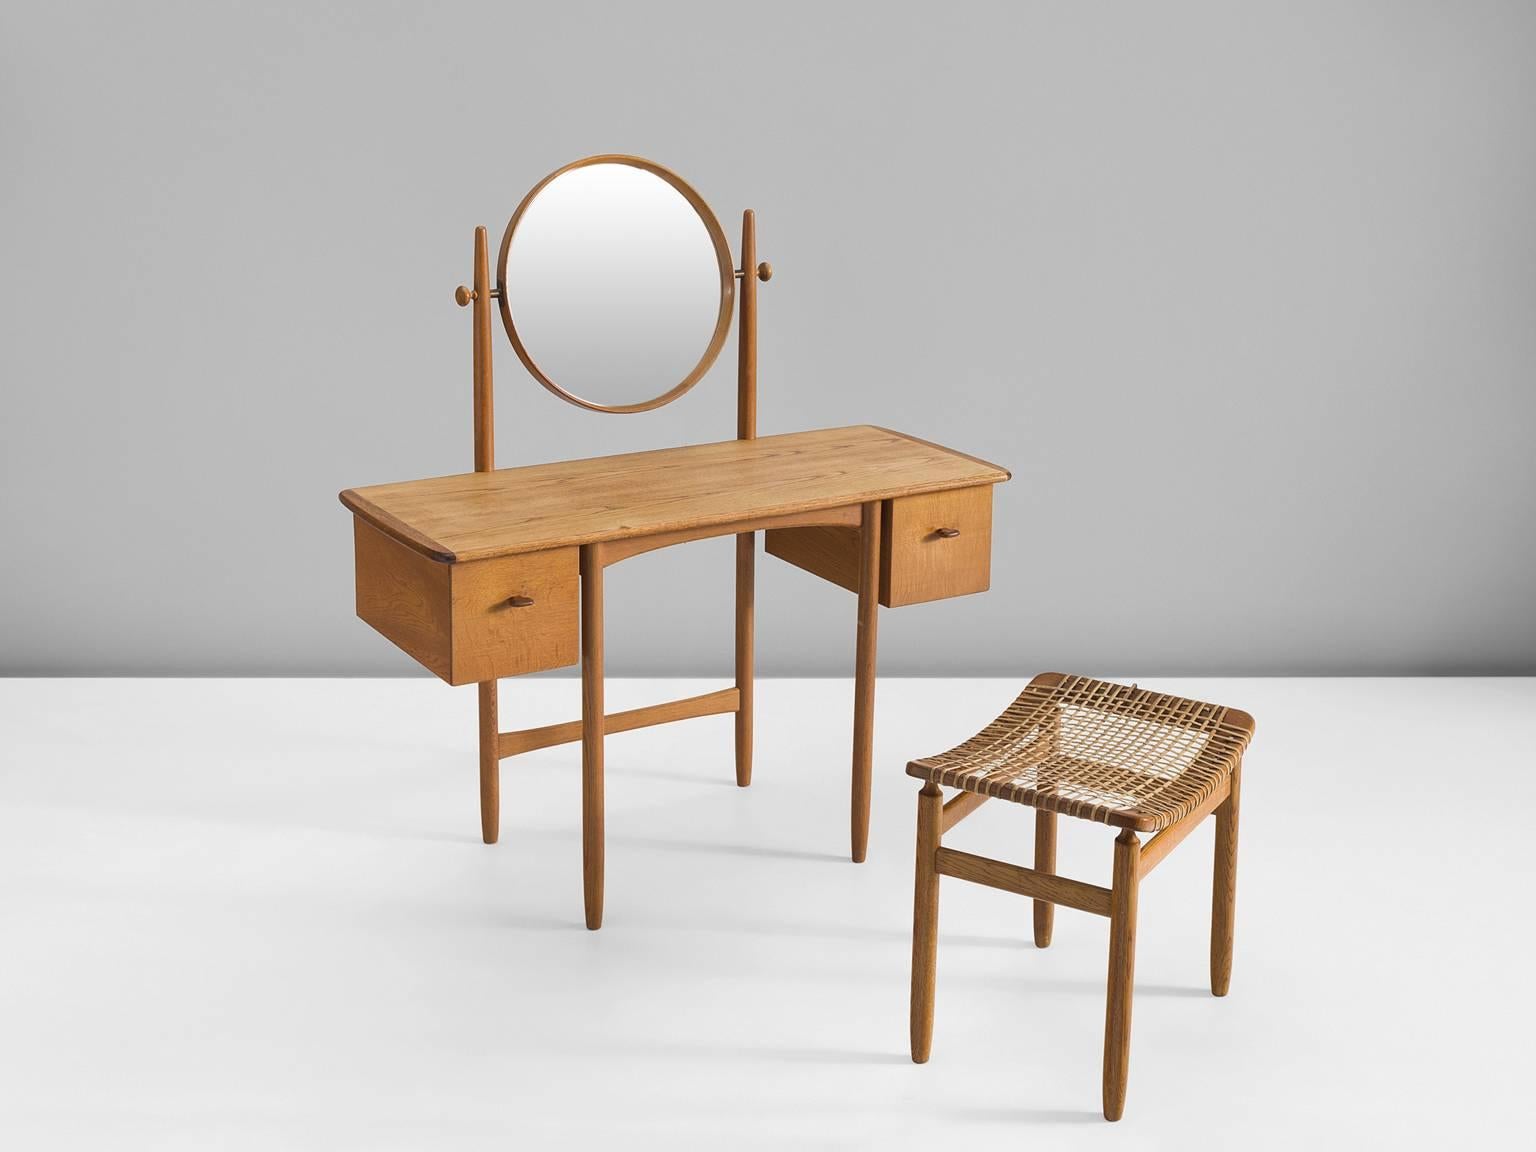 Dressing table with stool, teak, mirror and cane, by Sven Engström & Gunnar Myrstrand for Bodafors, Sweden, 1950s.

This set is wonderfully balanced. The dressing table itself shows refined detailing in joints, handles and finishes whereas the